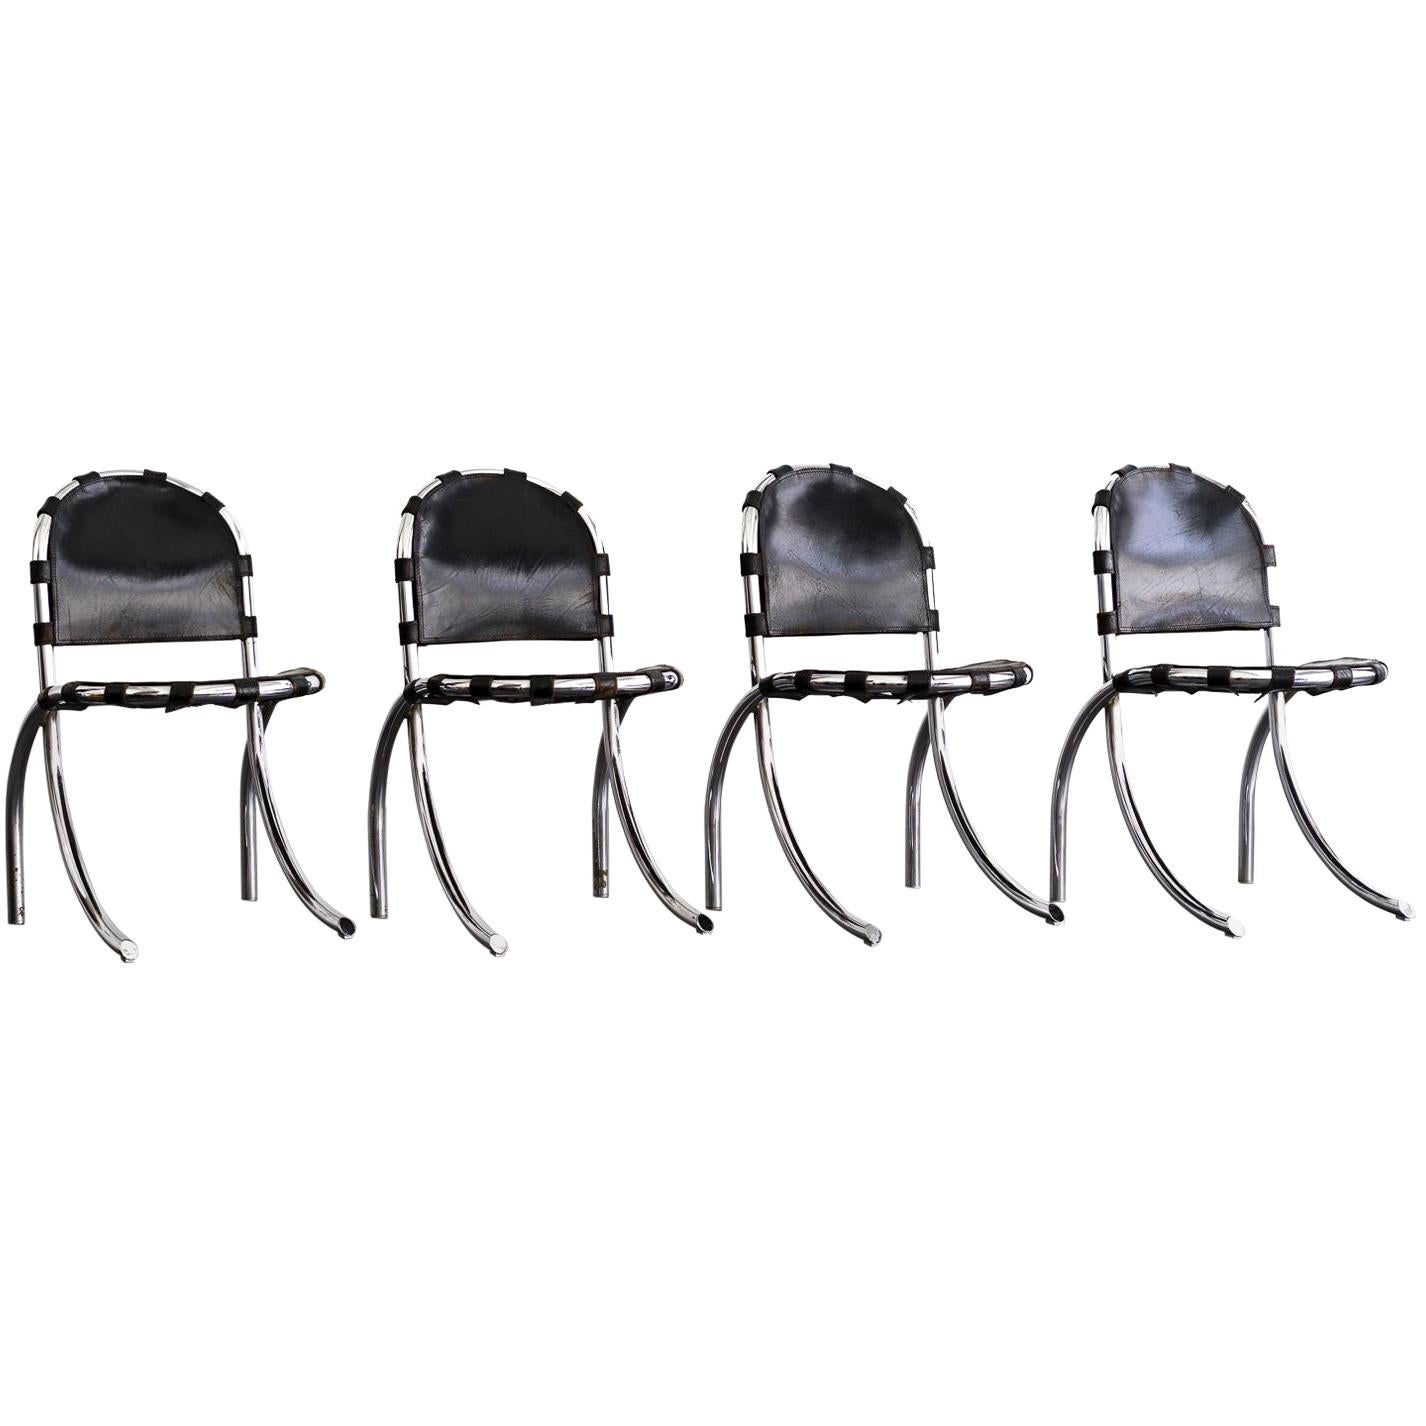 Set of 4 "Medusa" Chairs by Studio Tetrarch for Alberto Bazzani, 1969 For Sale